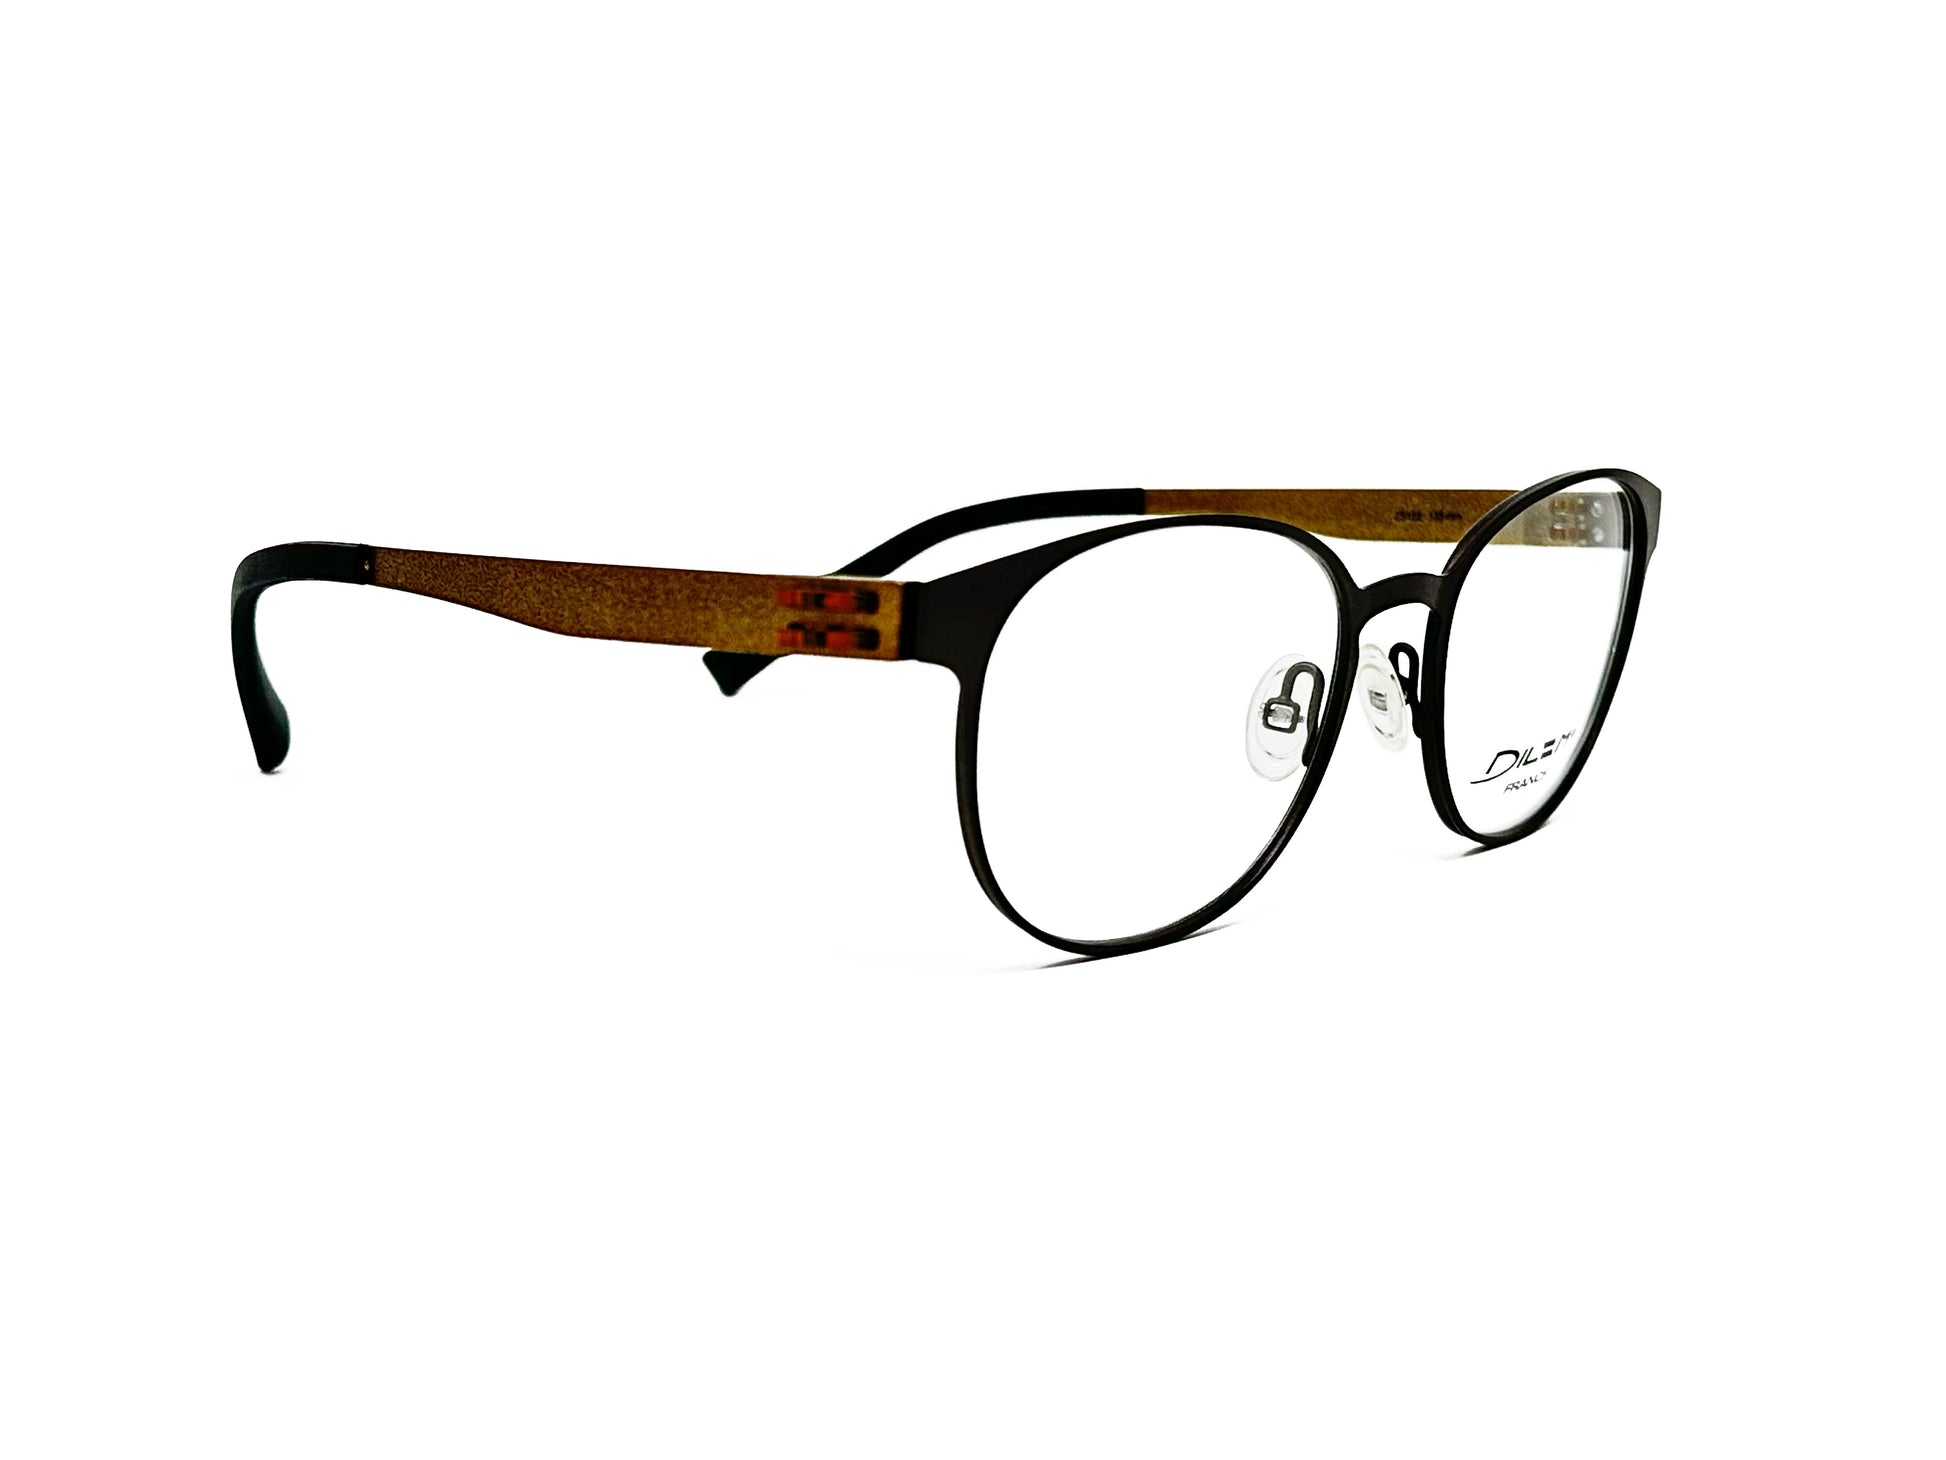 Dilem metal, rounded optical frame. Model: ZS122. Color: 1UE43 - Black with brown temples. Side view.